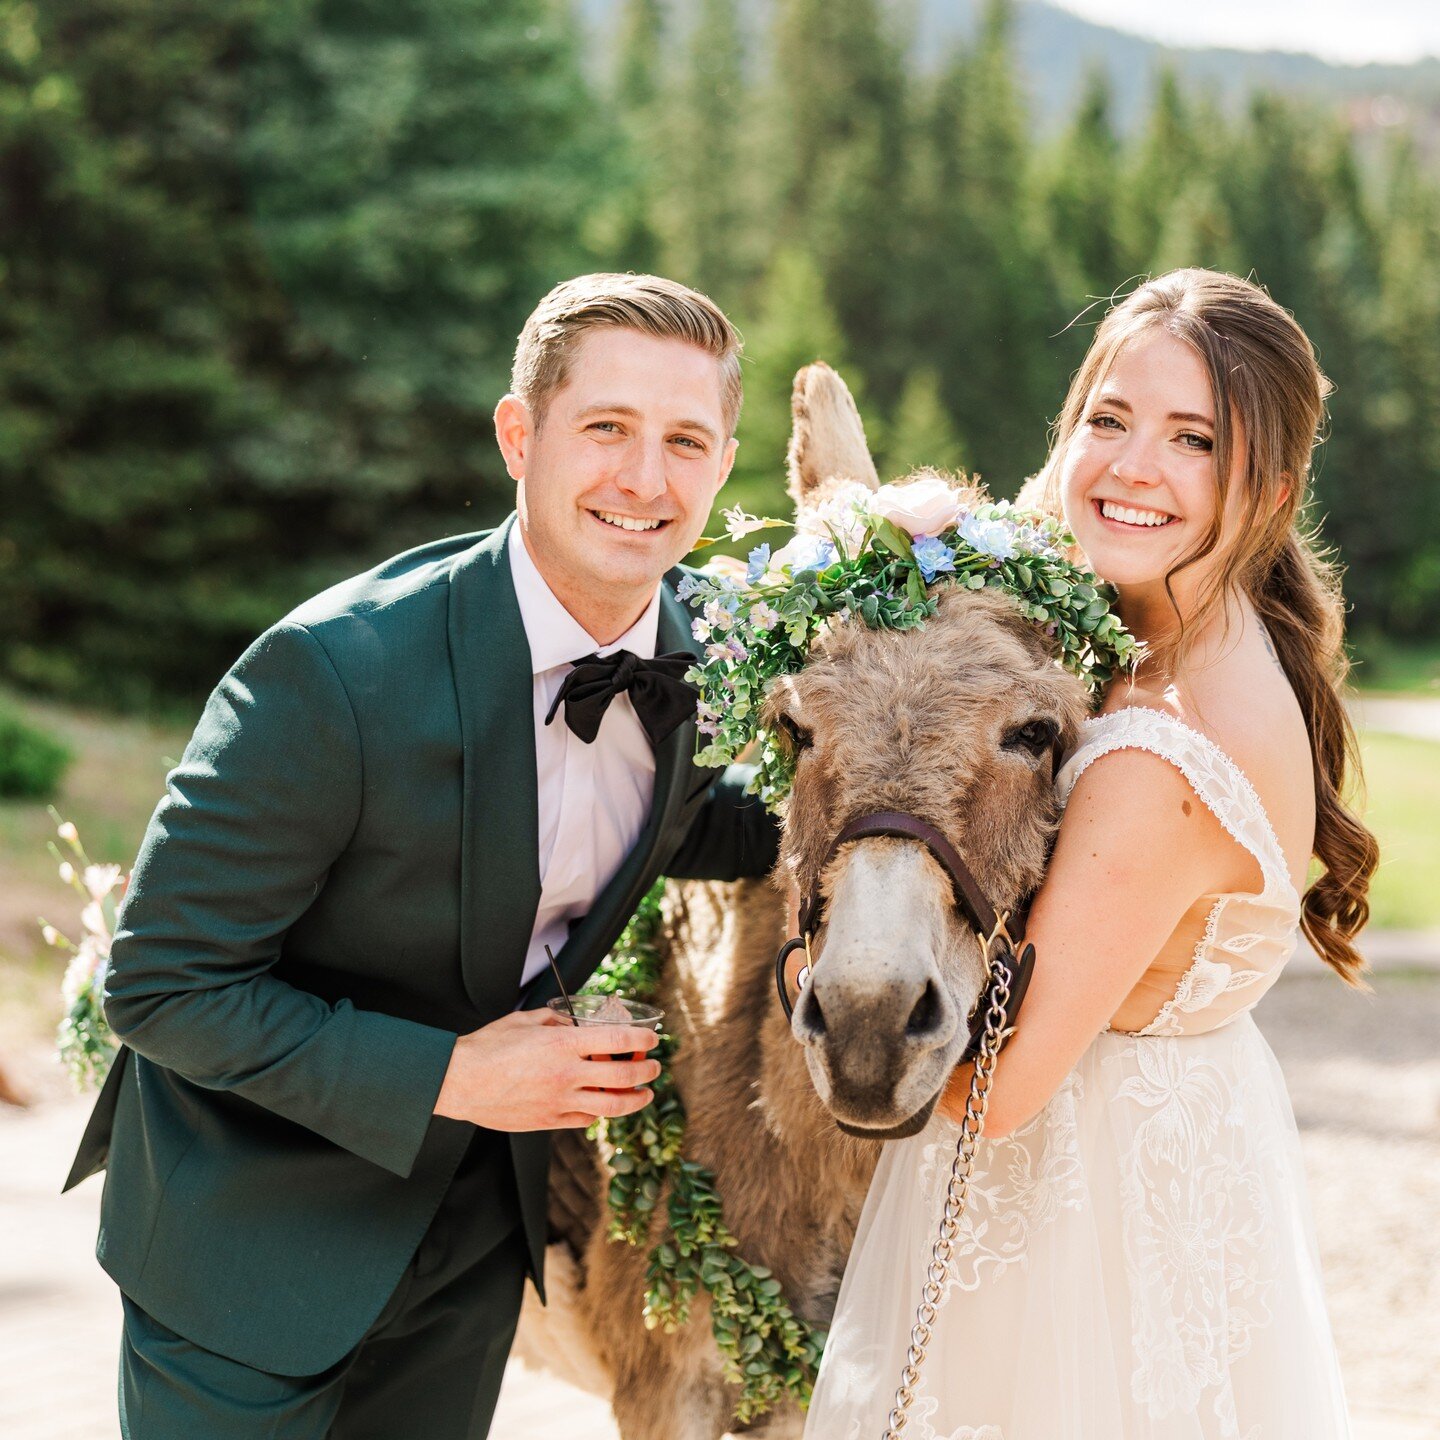 Beverage Burros are always a plus in my book!!! 

Christine and Devon had the sweetest celebration last week! They actually eloped and said their vows privately the weekend before, and shared the video they made with friends and fam in place of a cer